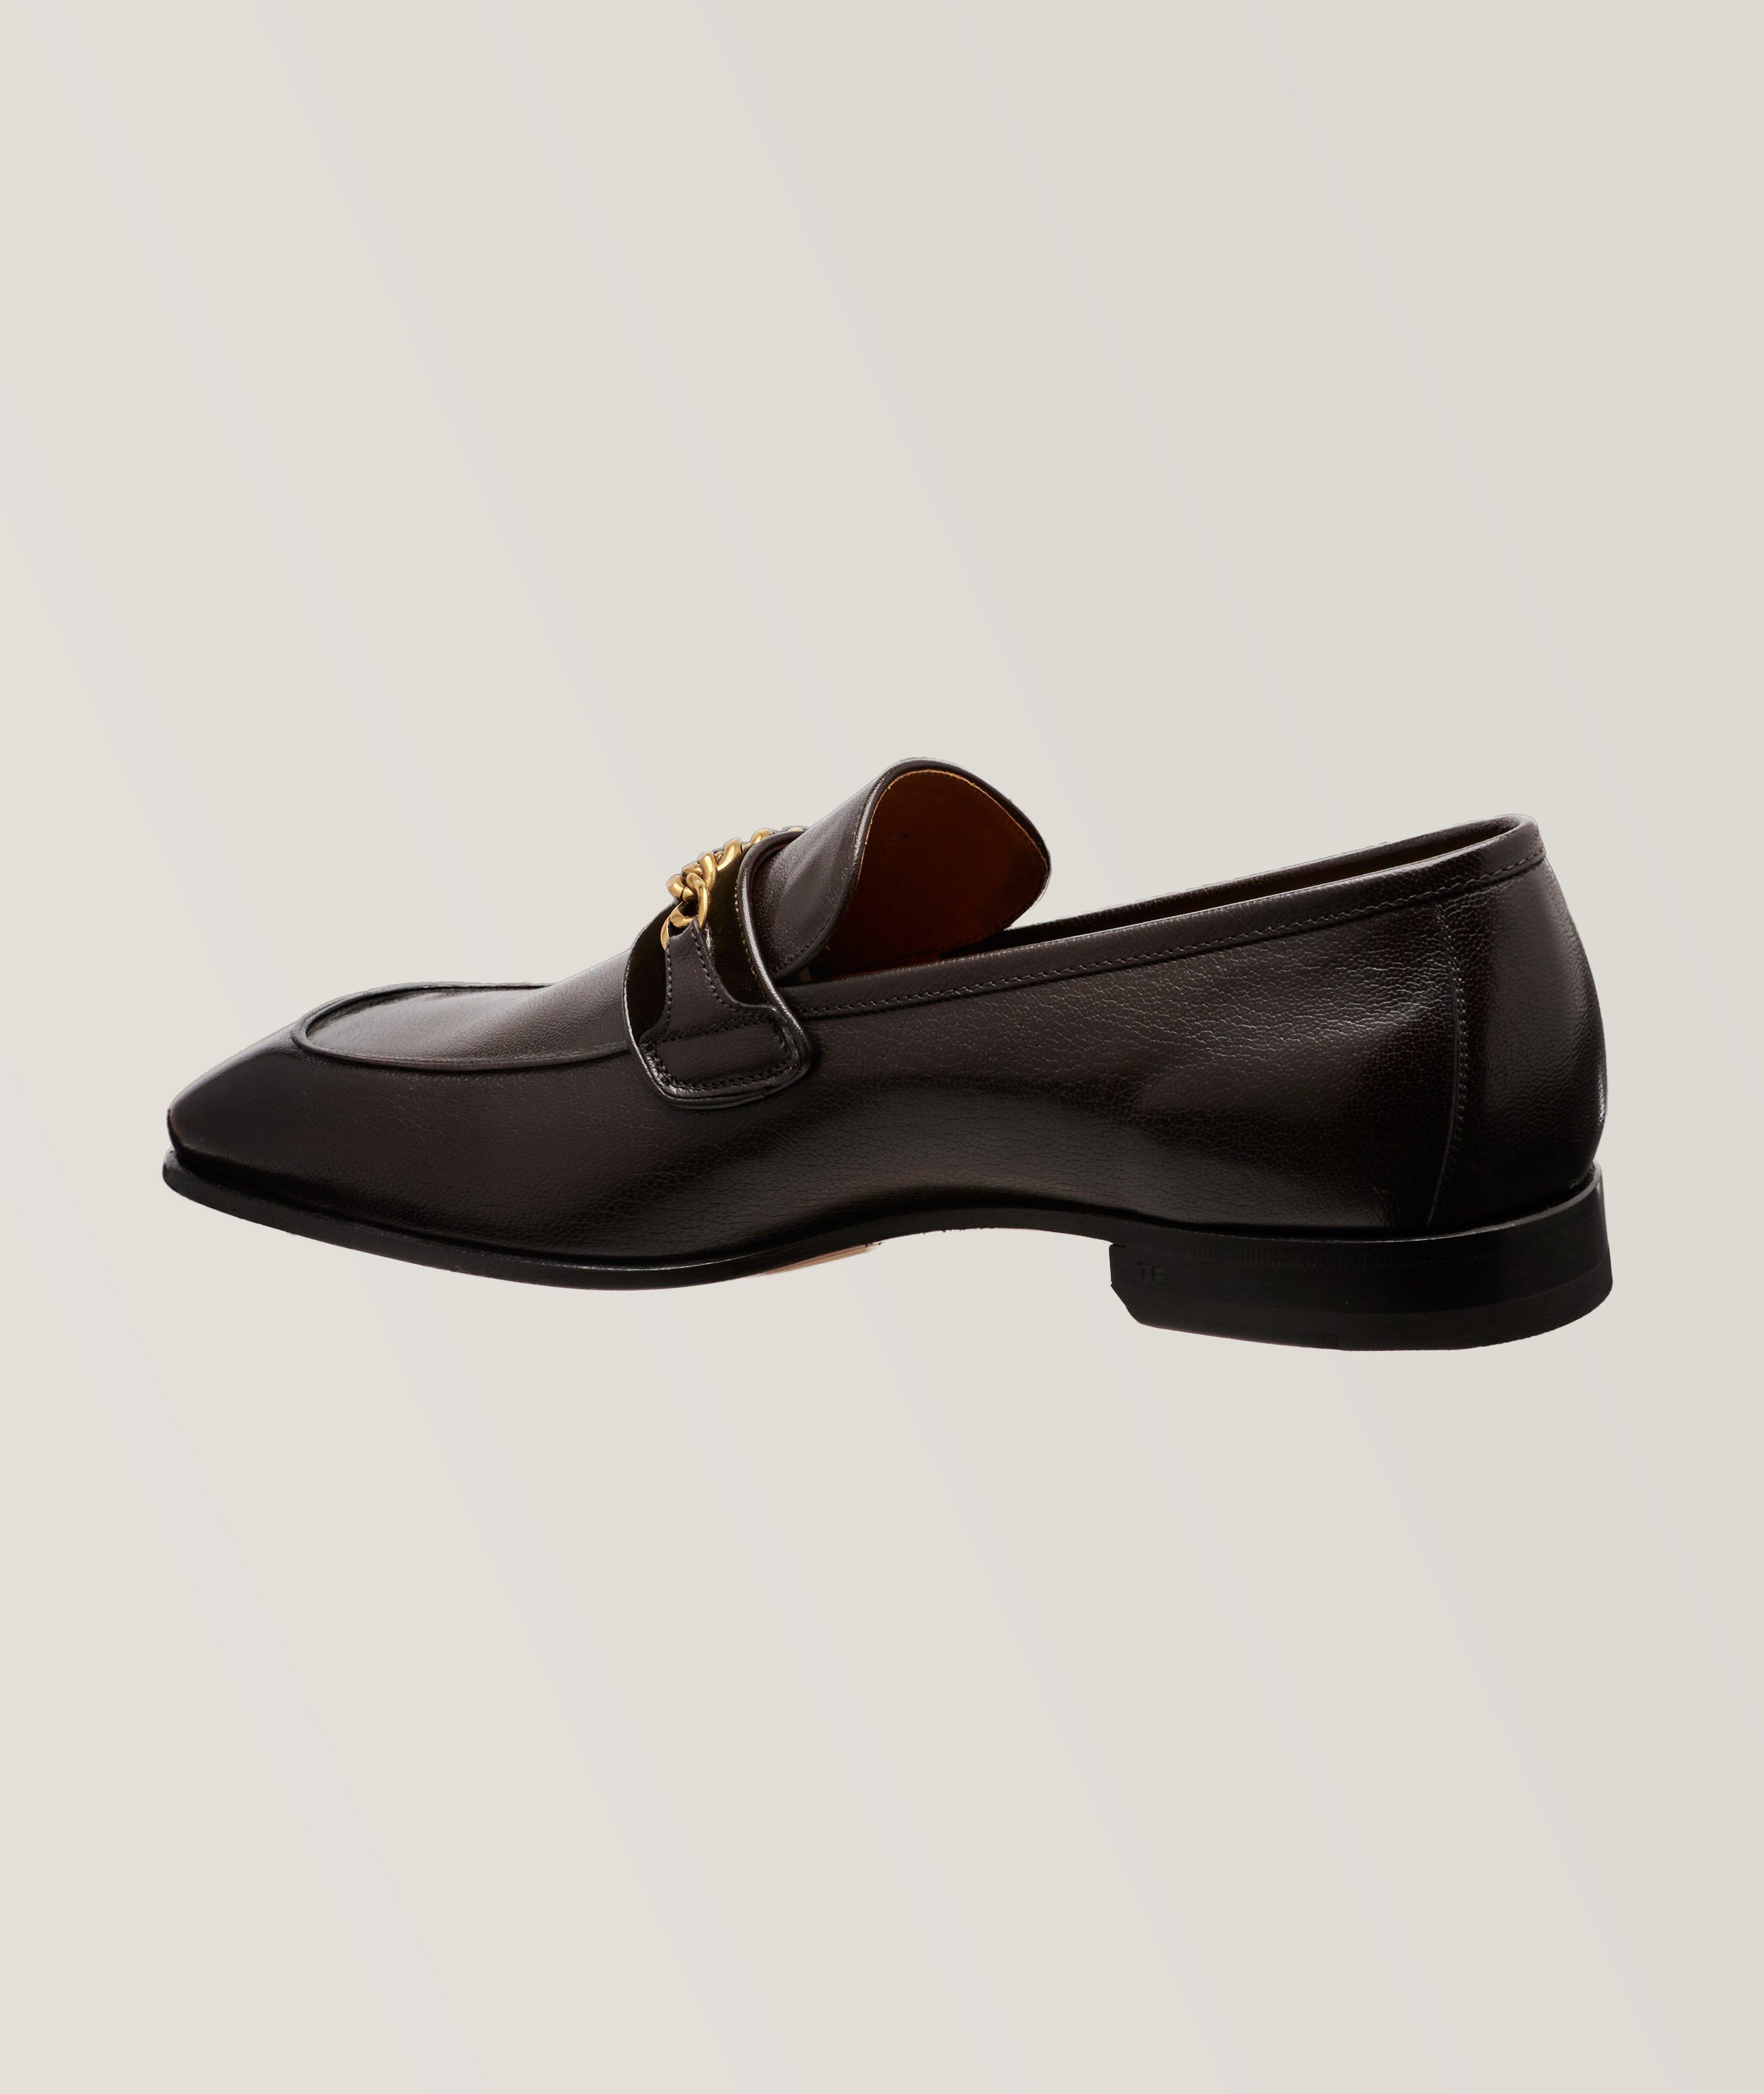 Bailey Grained Chain Leather Loafers image 1